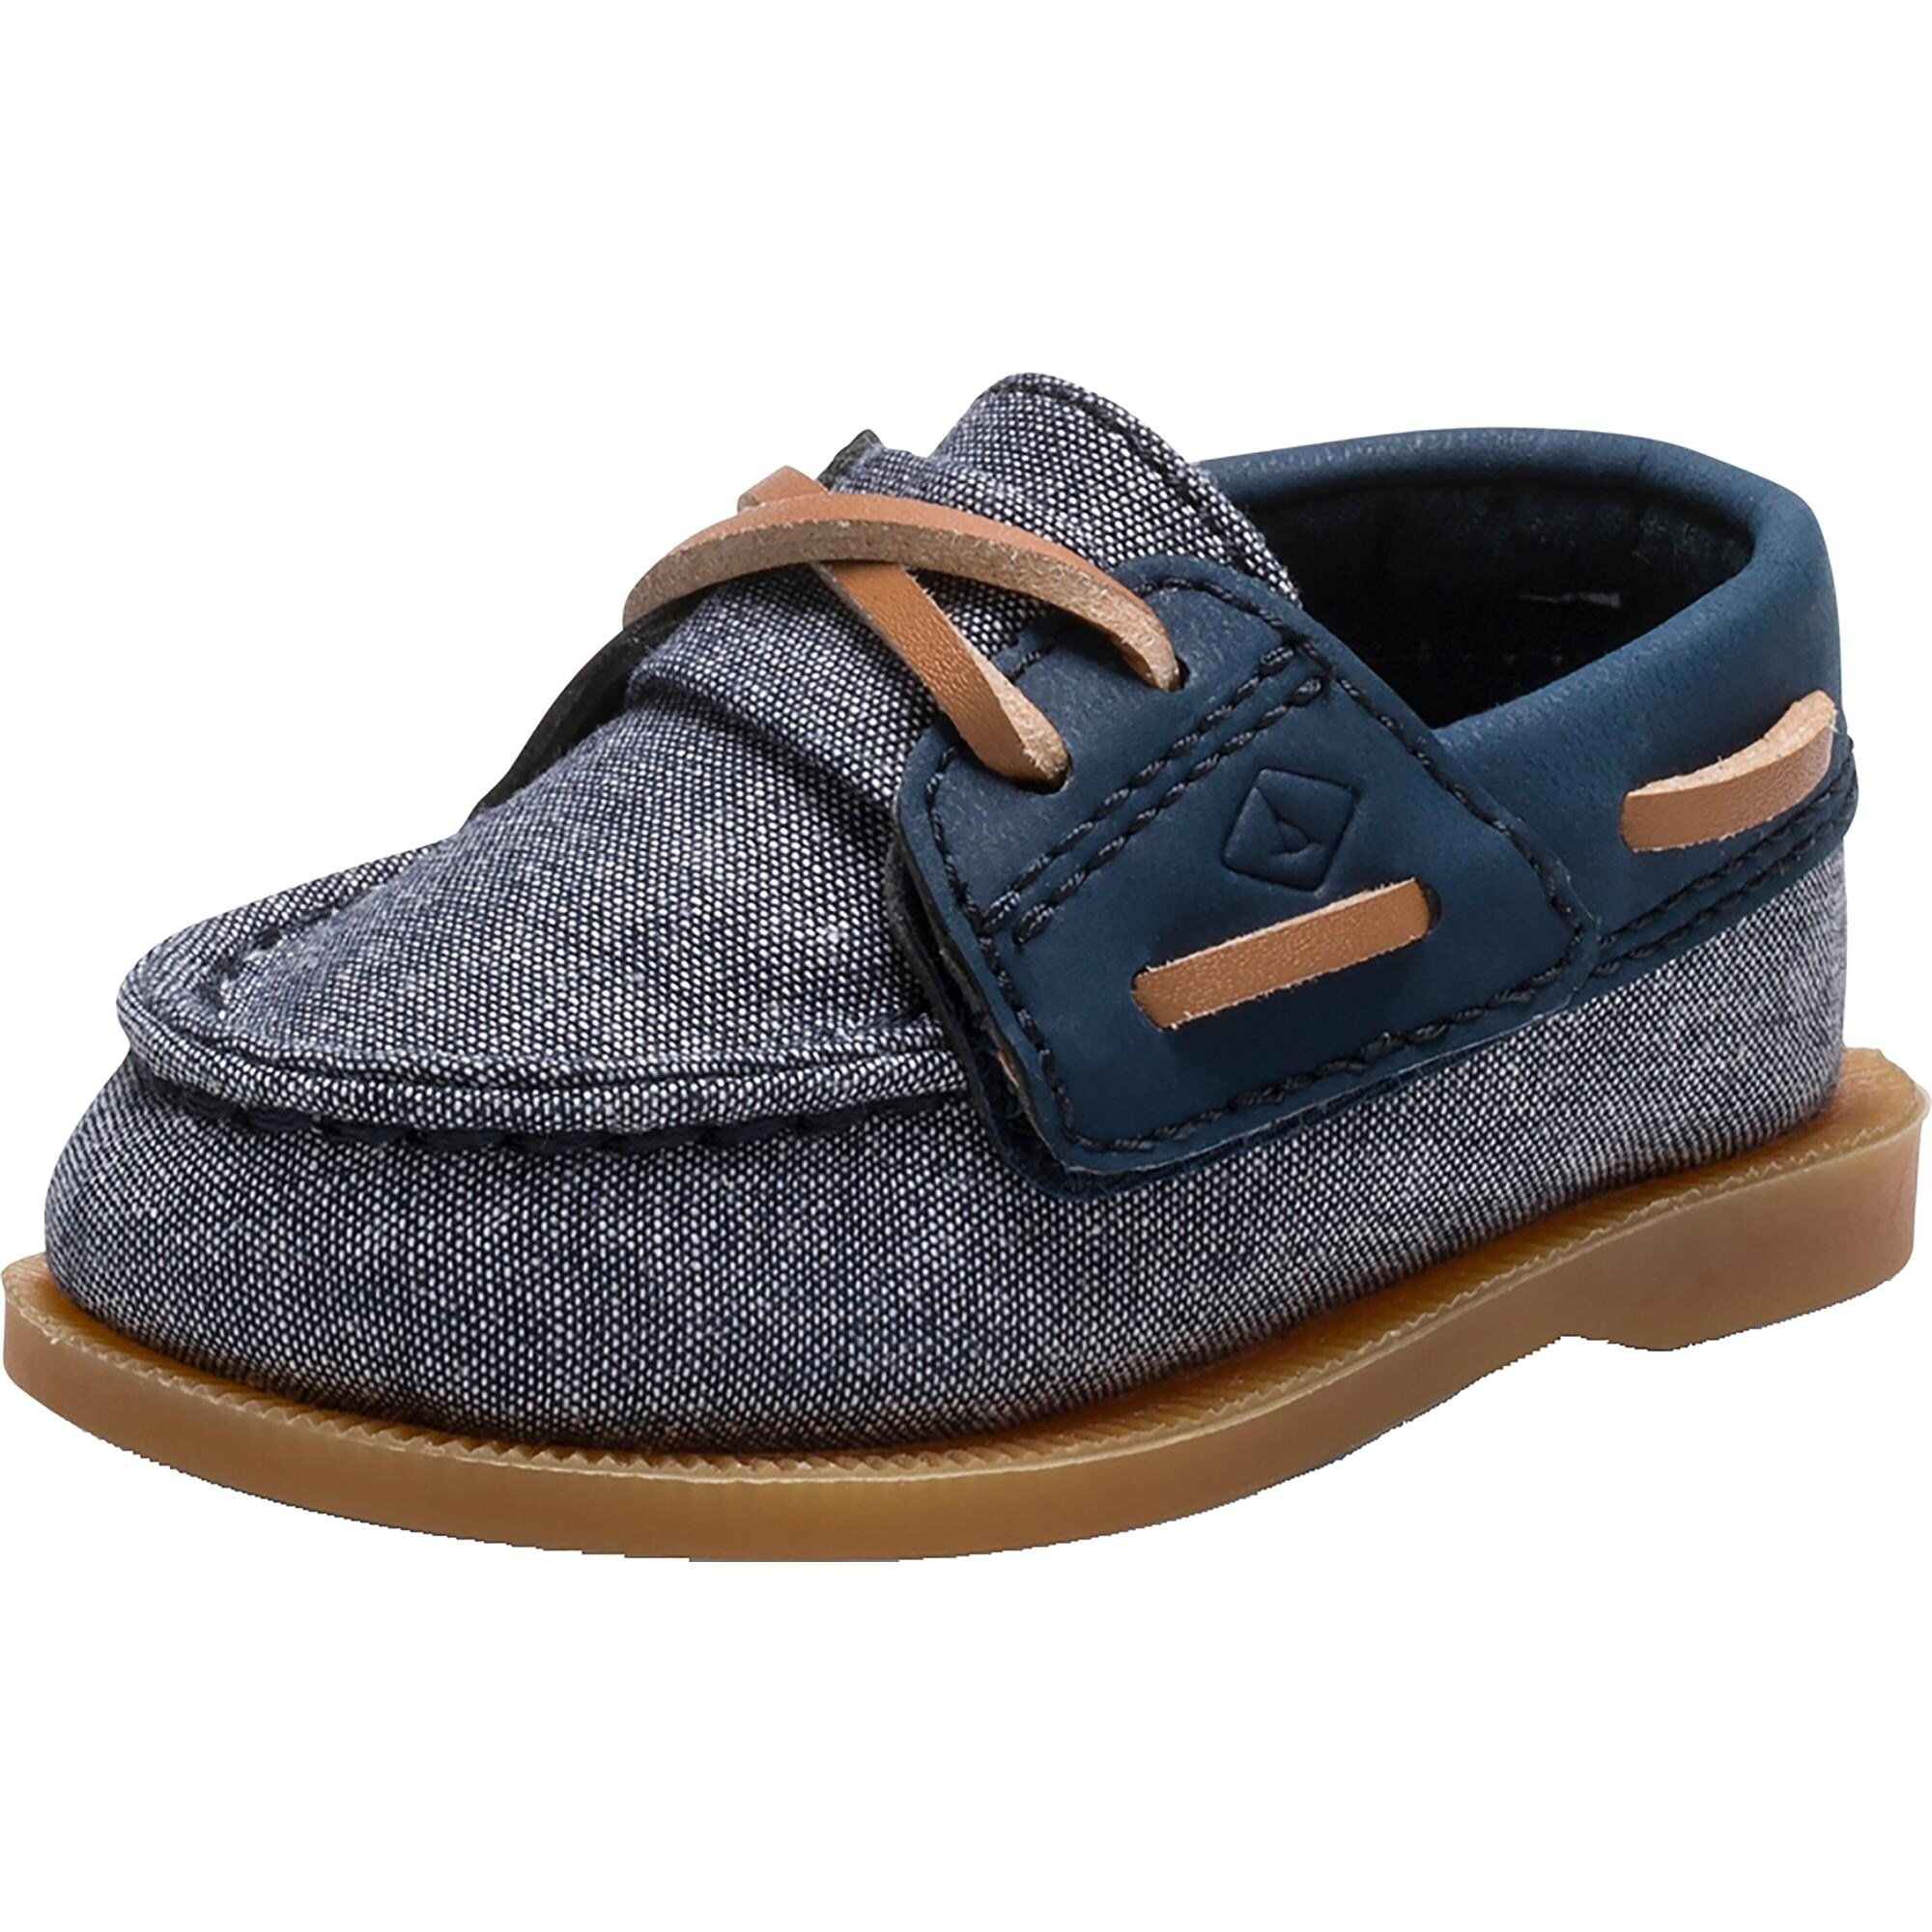 boys canvas boat shoes